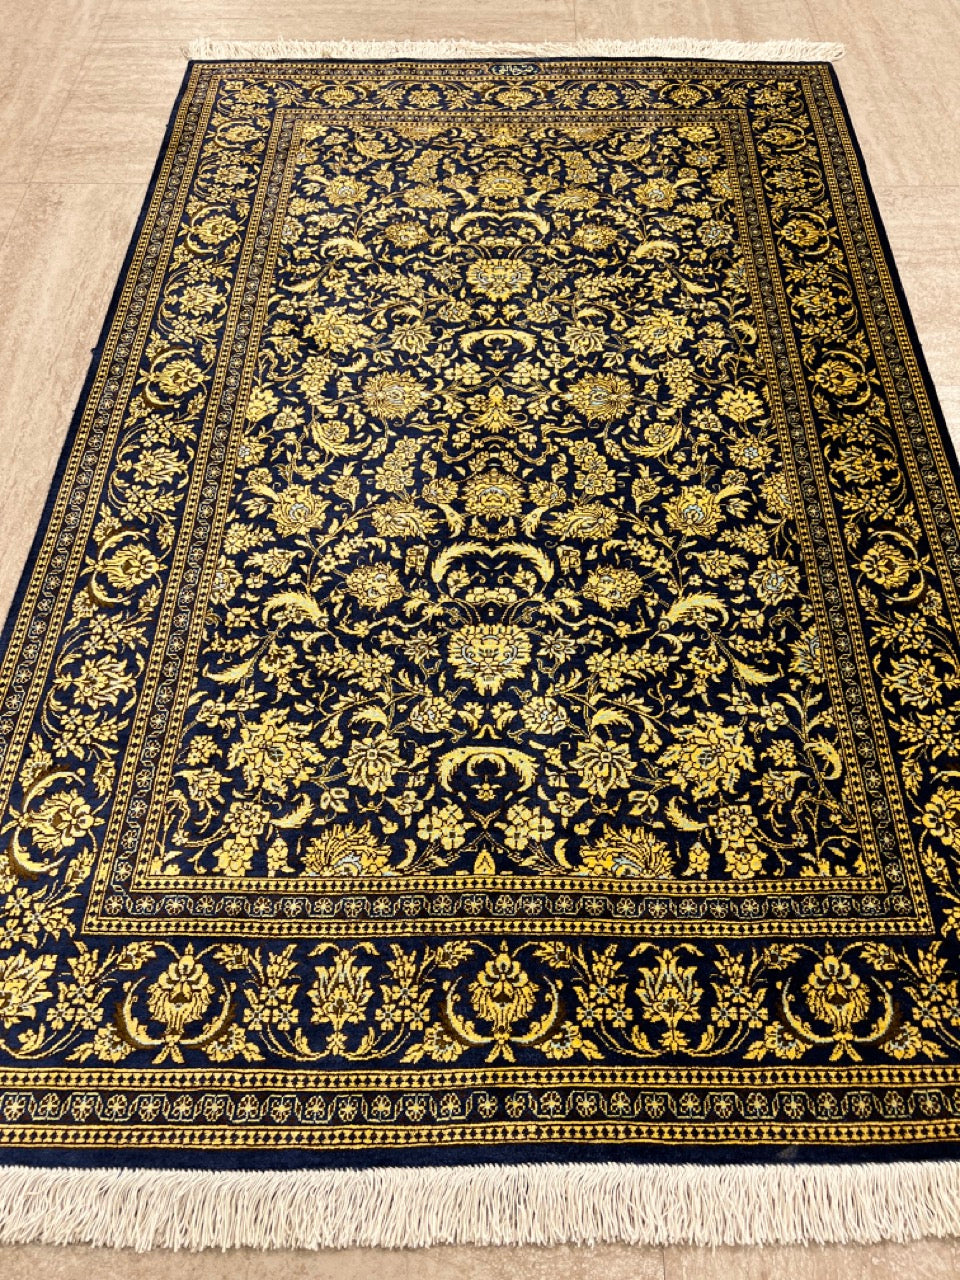 Gold Blue Hand-Woven Traditional Persian Silk Qom Rug product image #27562531389610